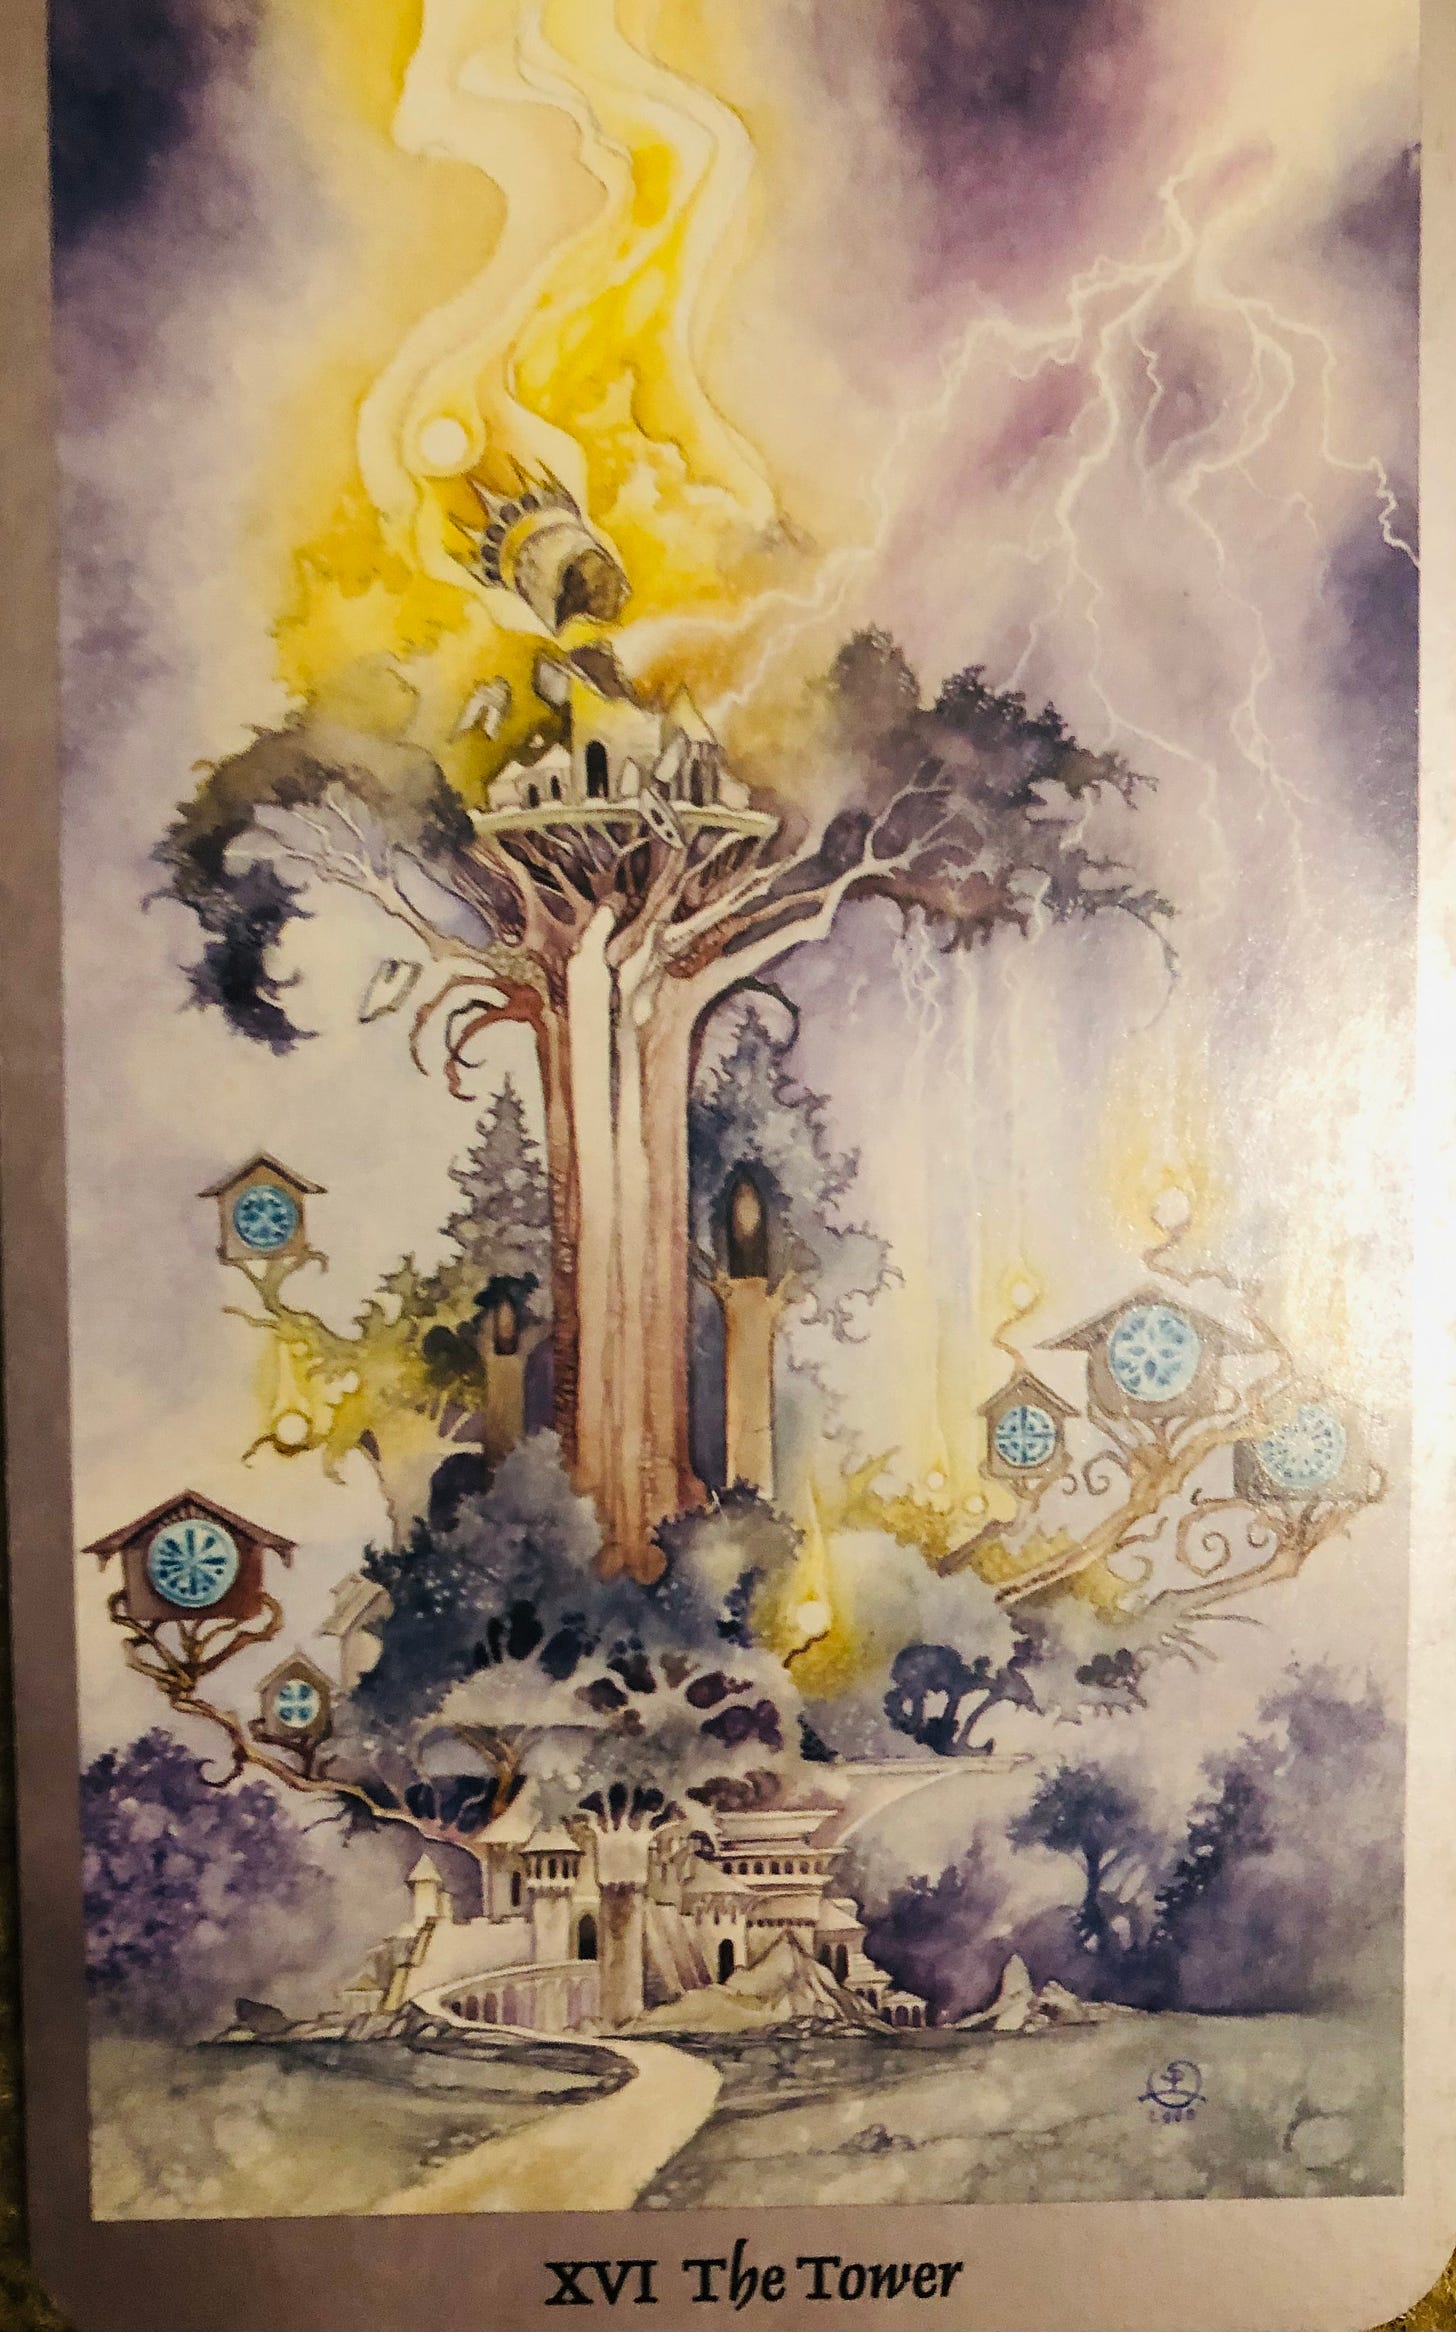 16th card of a tarot deck: The Tower - lightning blasts the towering tree beneath which countless homes are sheltered. The blaze spreads, destroying everything in sight.